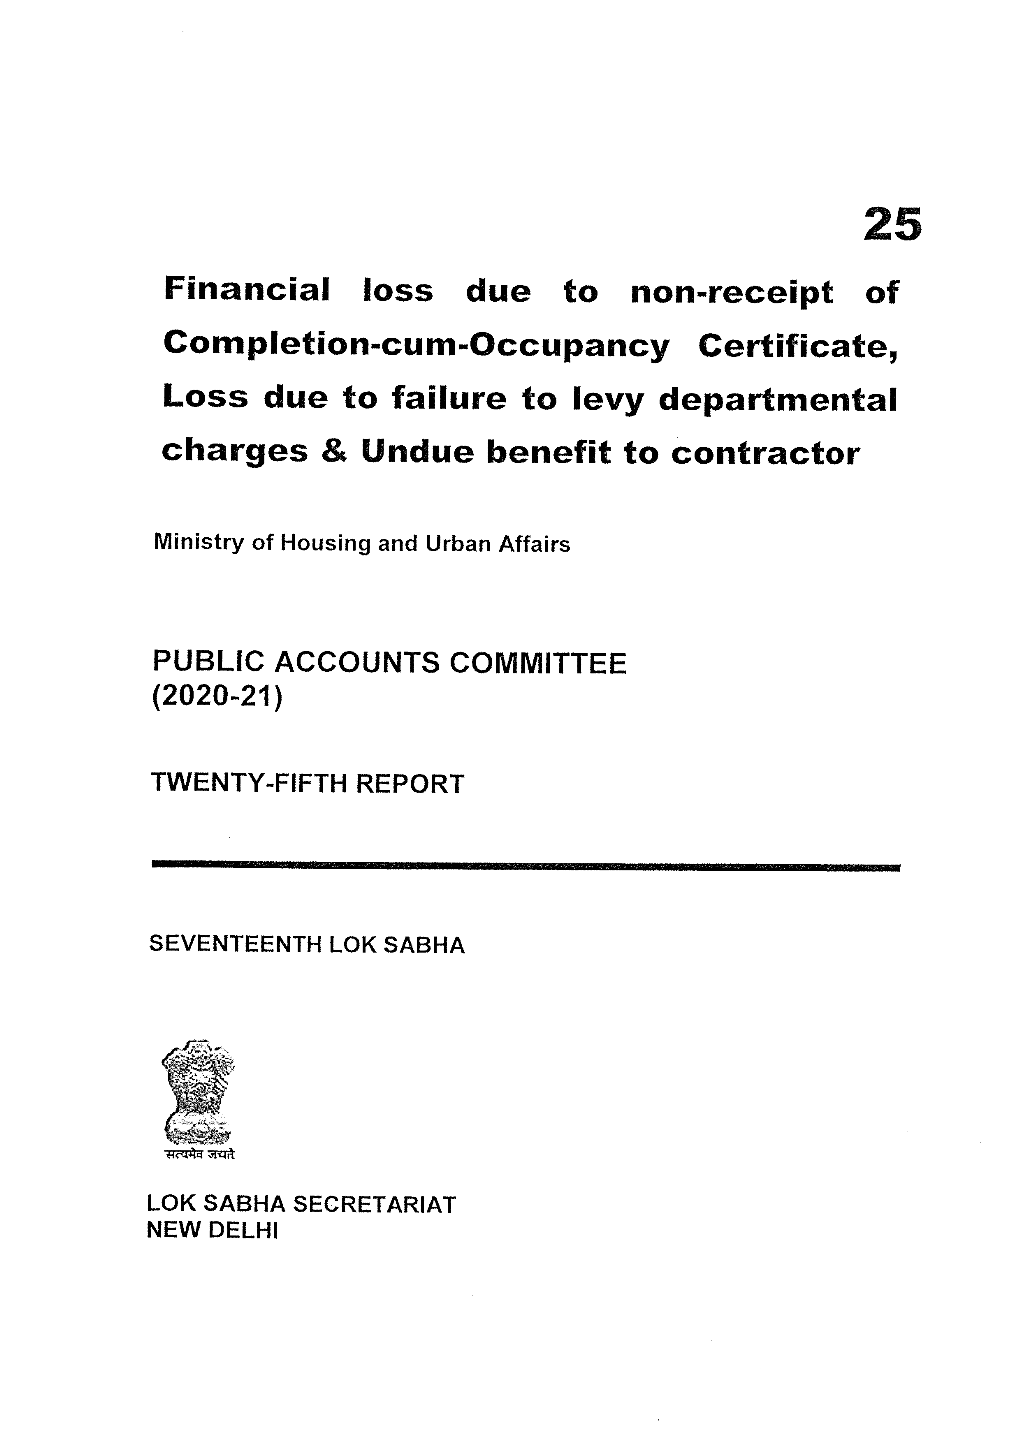 Financial Loss Due to Non-Receipt of Completion-Cum-Occupancy Certificate, Loss Due to Failure to Levy Departmental Charges & Undue Benefit to Contractor